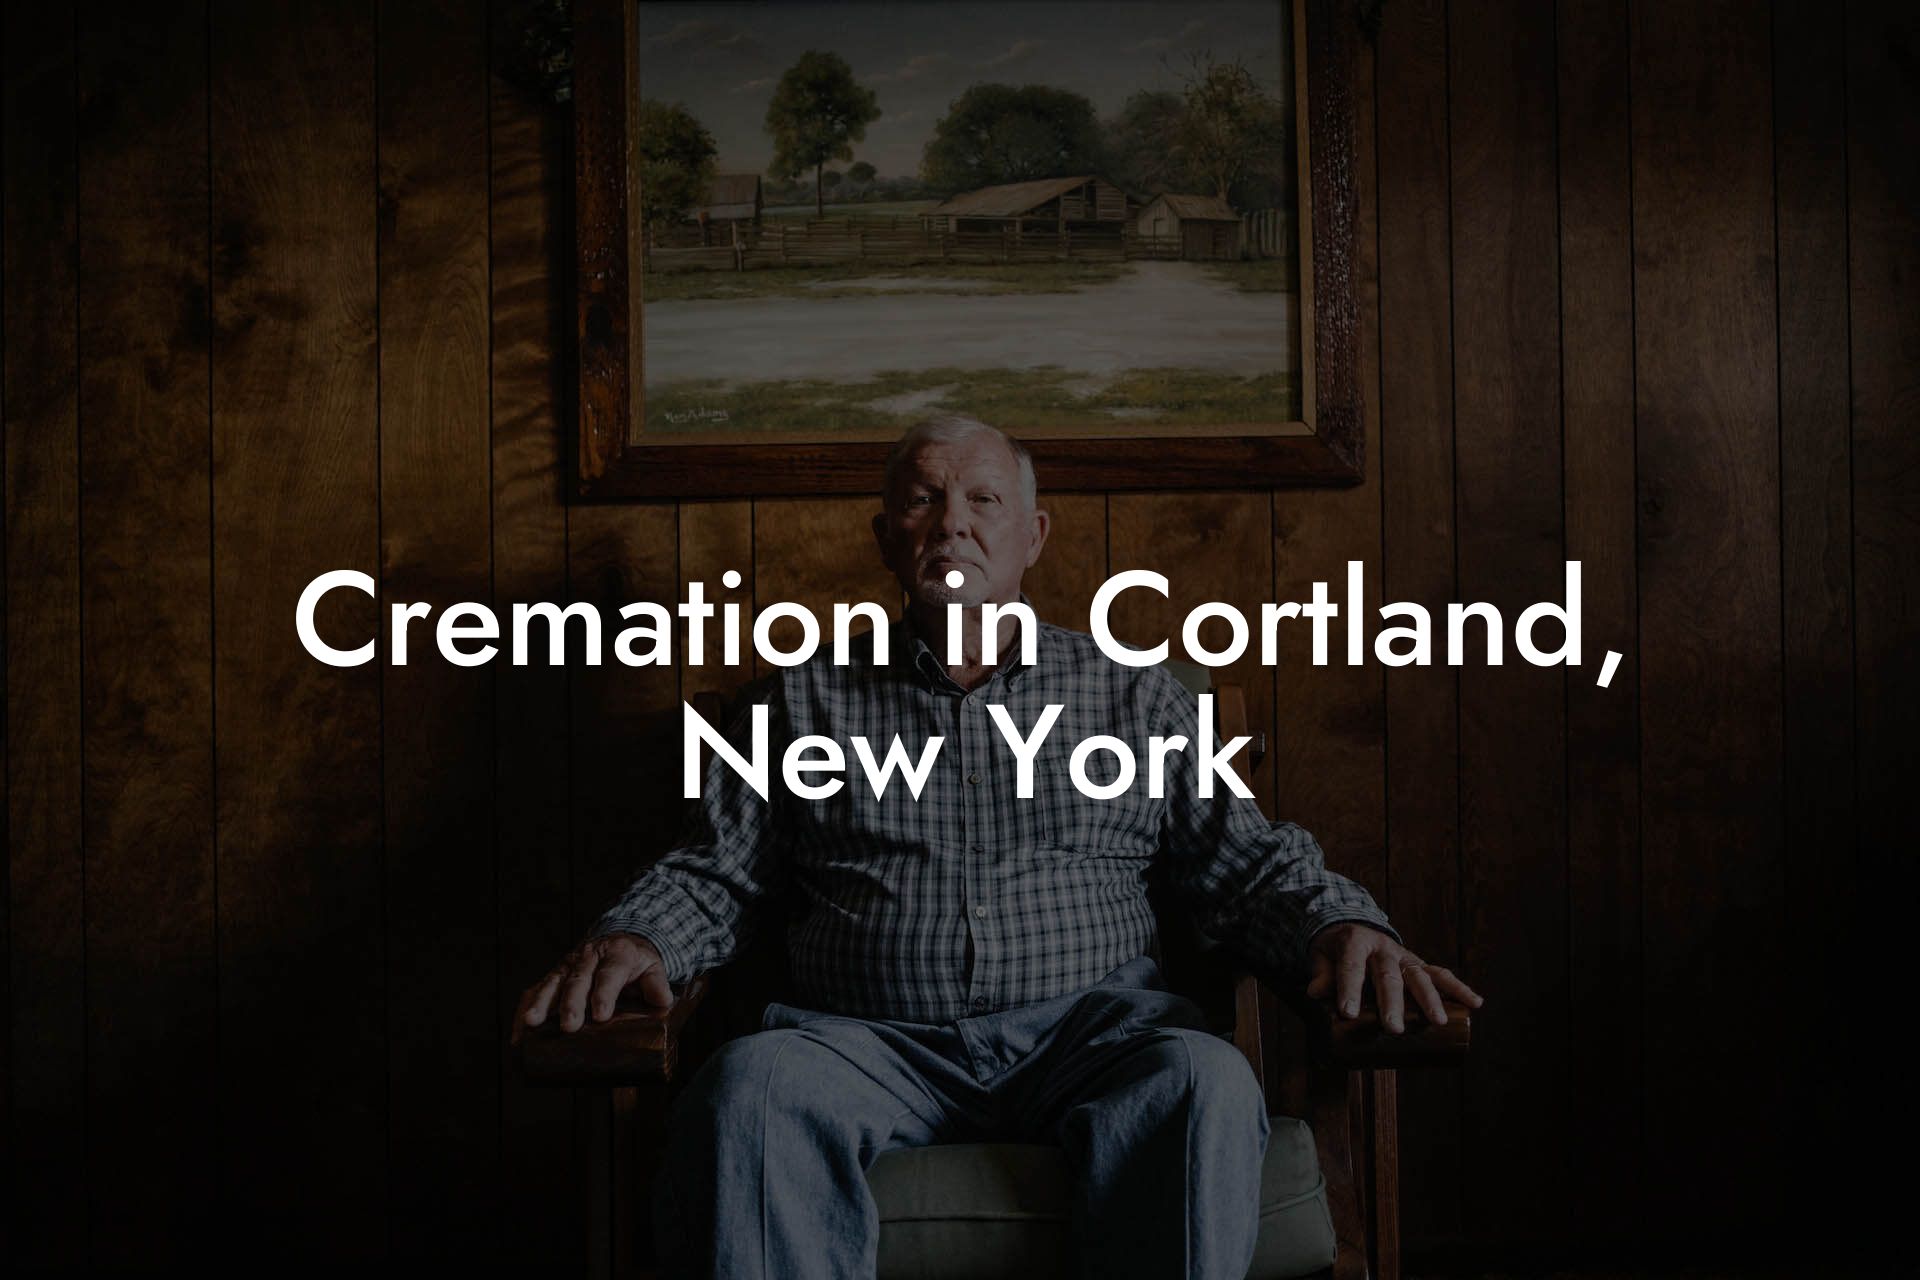 Cremation in Cortland, New York